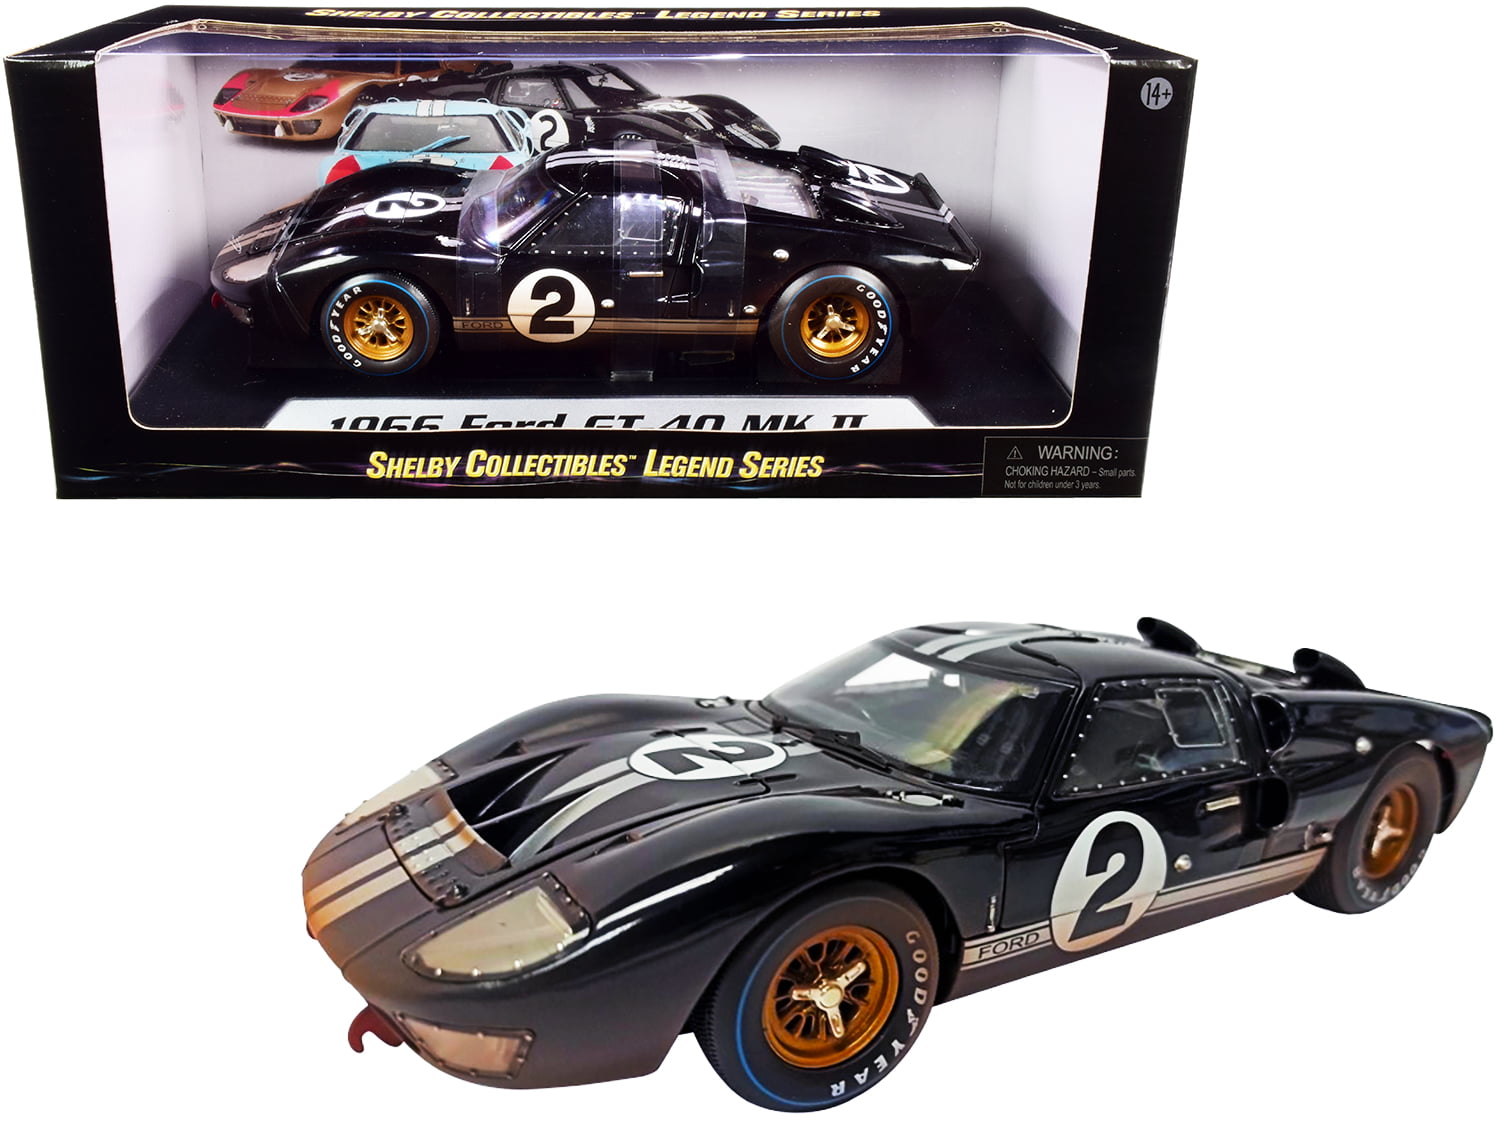 1966 Ford GT-40 MK II #2 Black 1/18 Diecast Model Car by Shelby Collectibles SC4